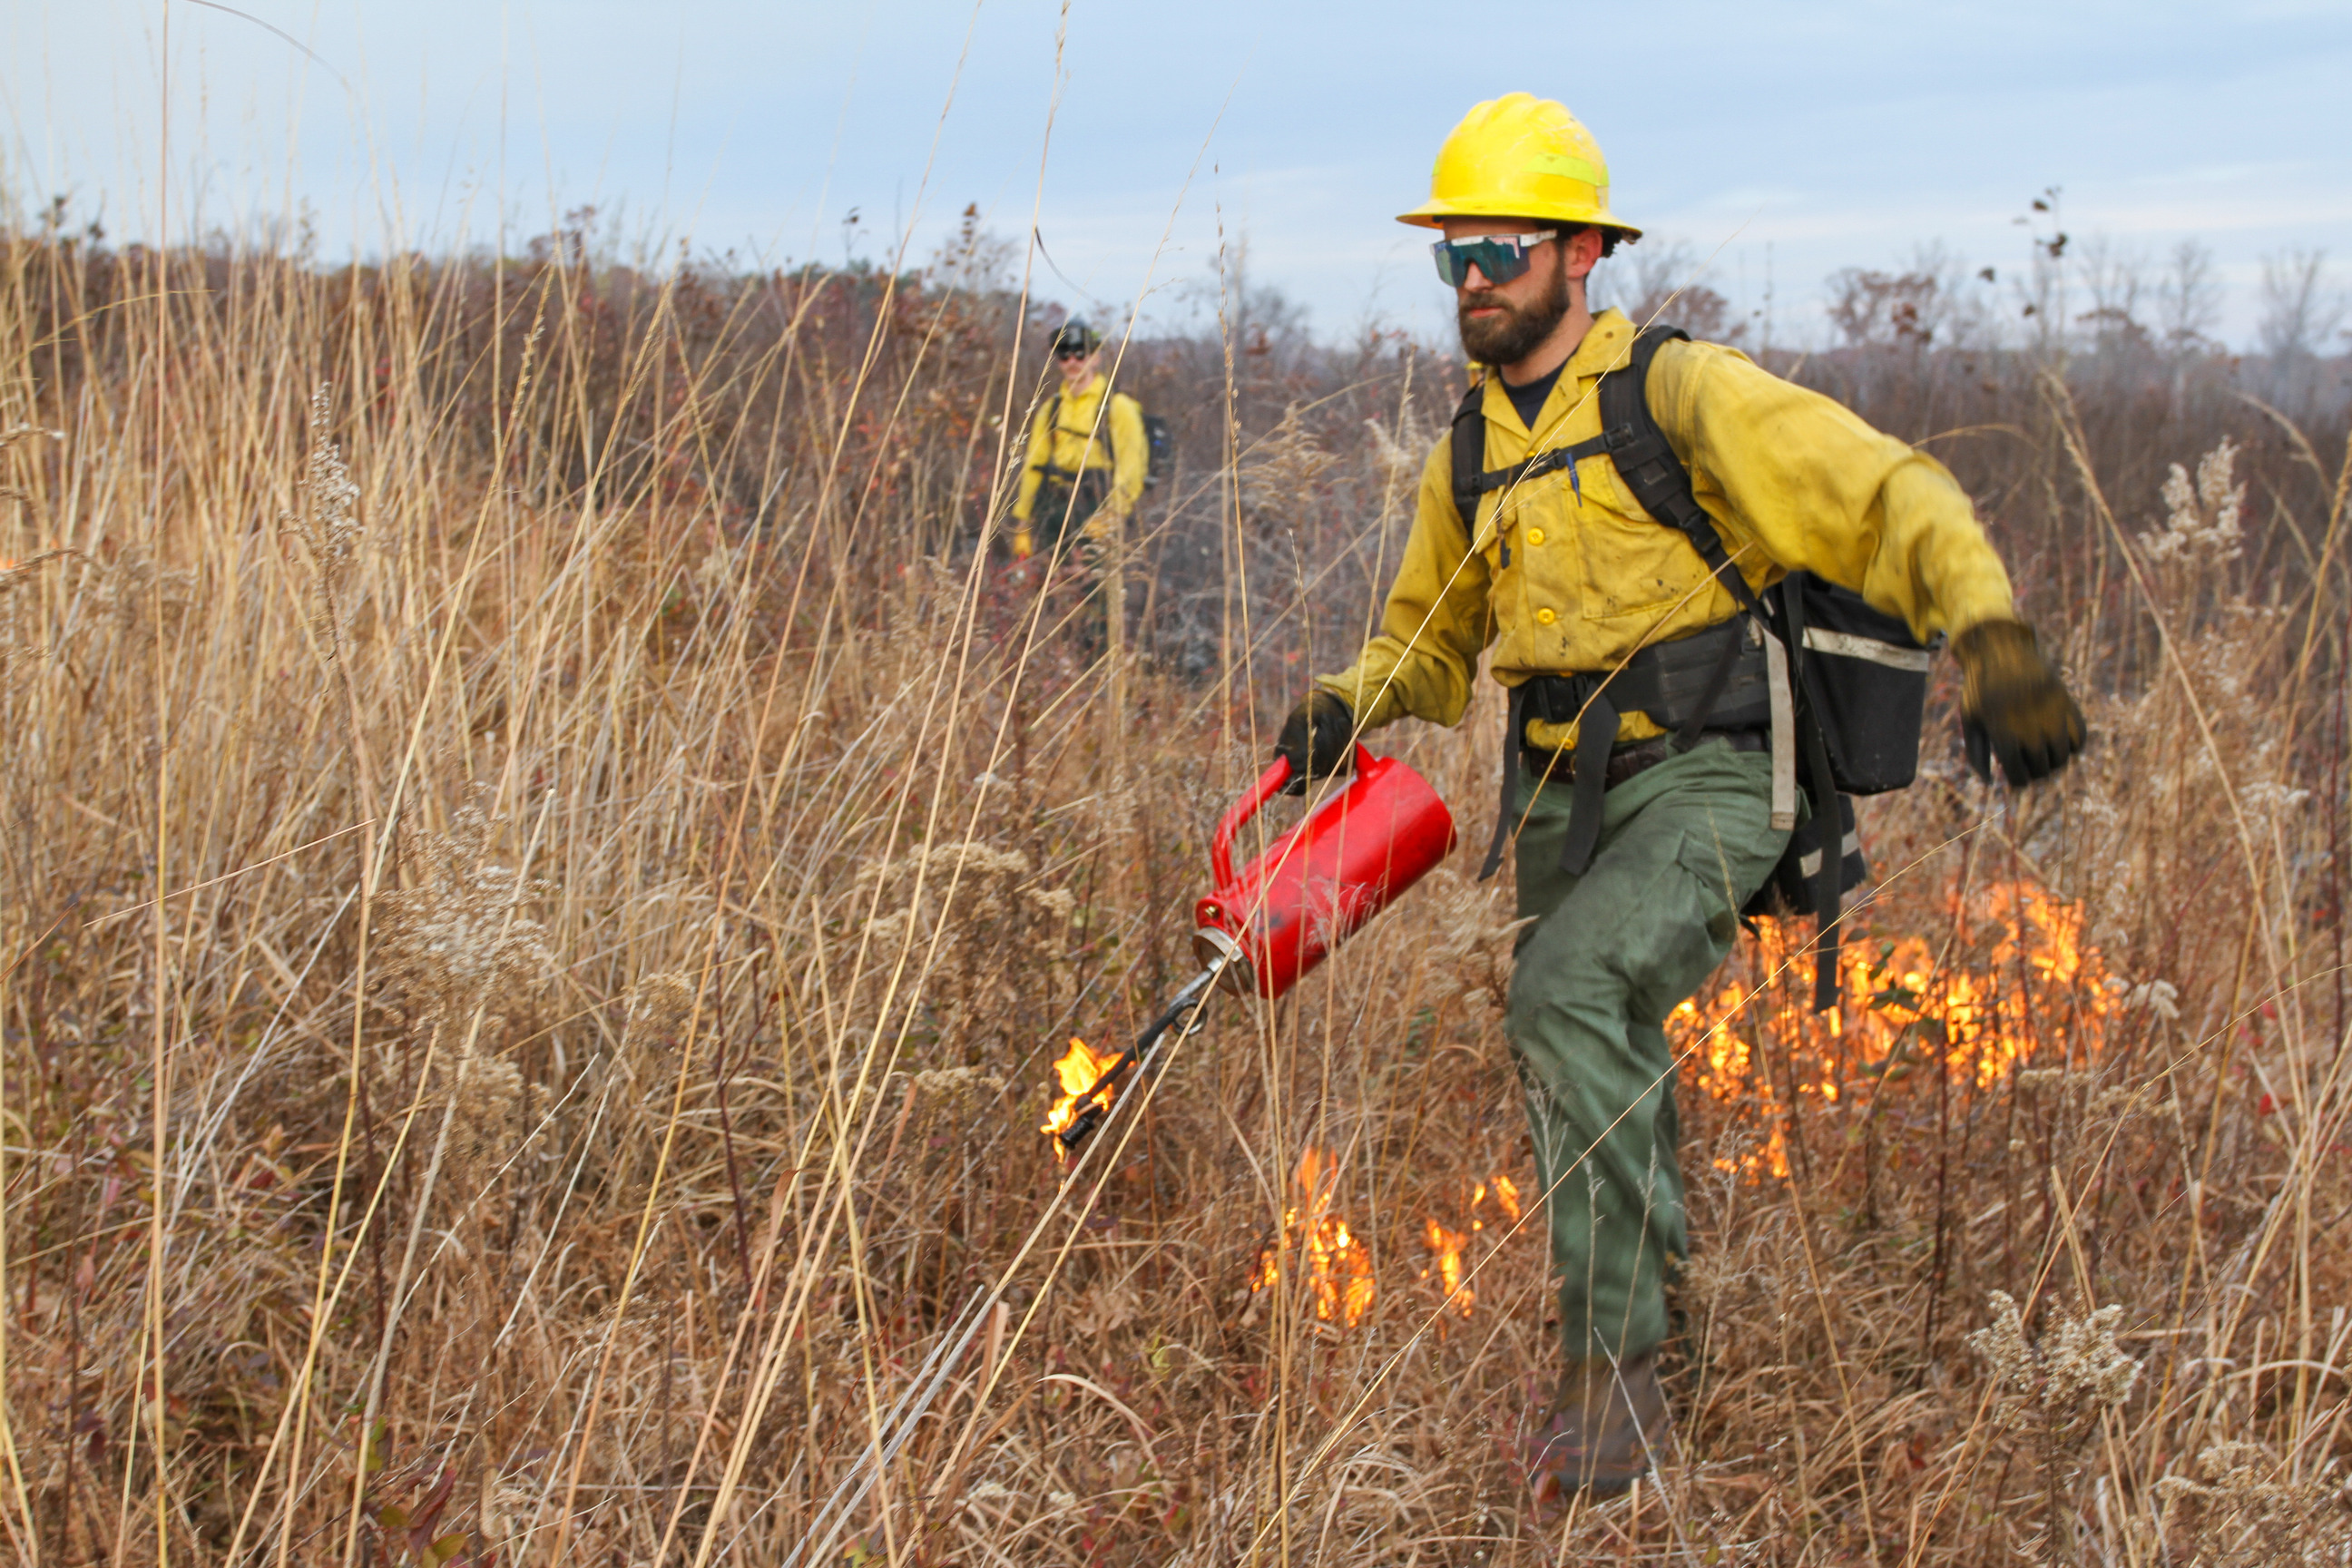 Two people stand in field of high grass. One carries a drip torch and is walking through grass to manage prescribed fire.